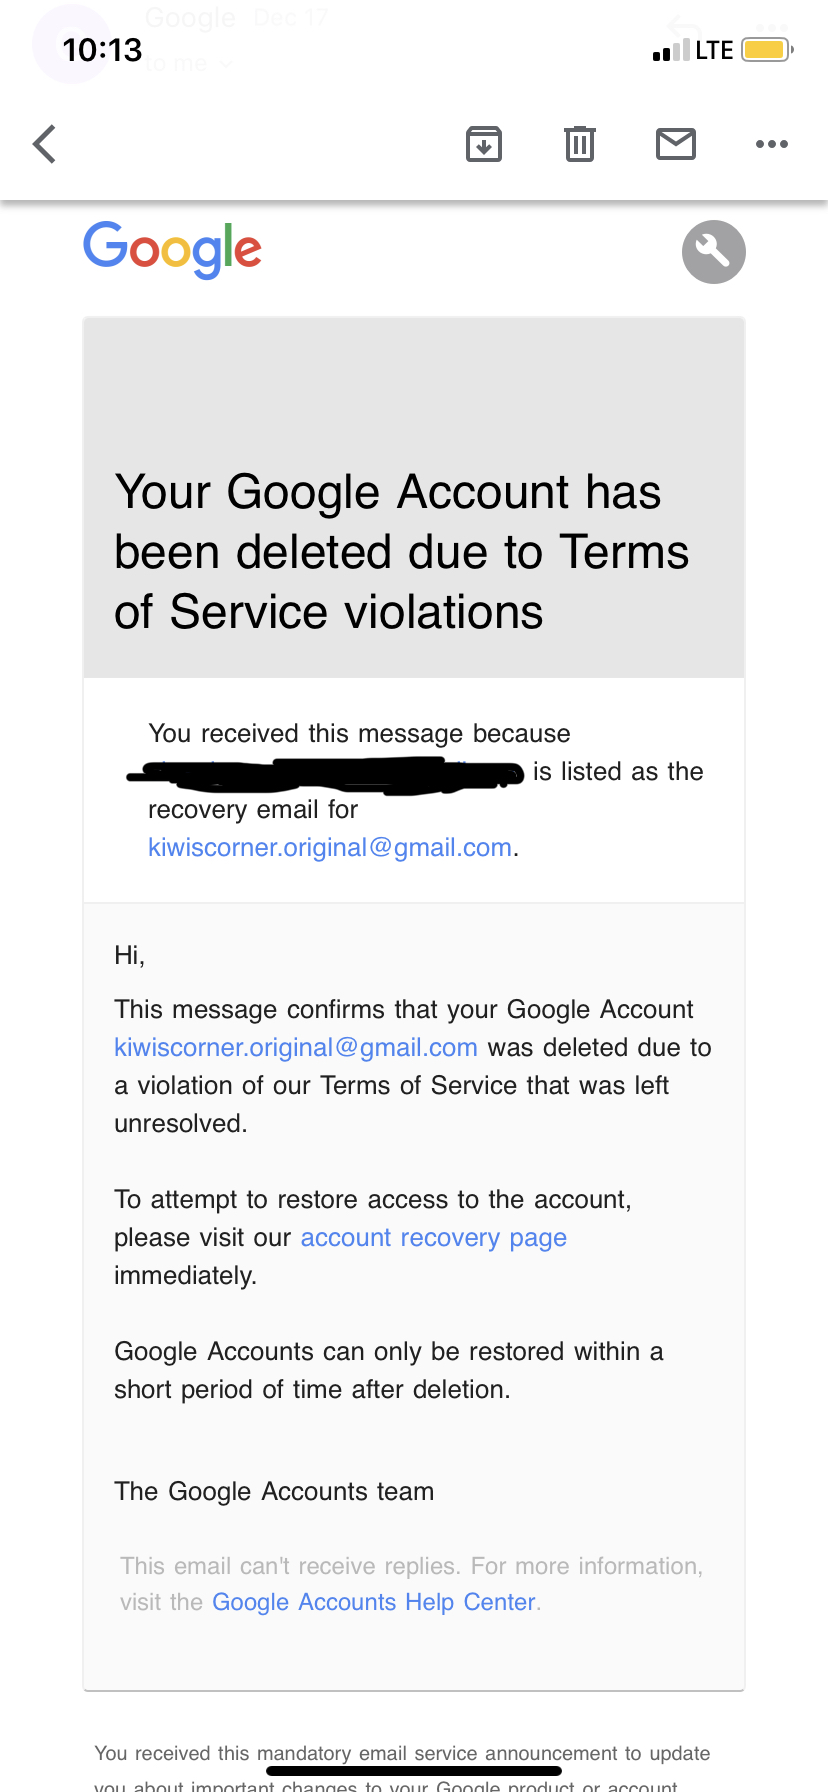 Log back in to your Google account